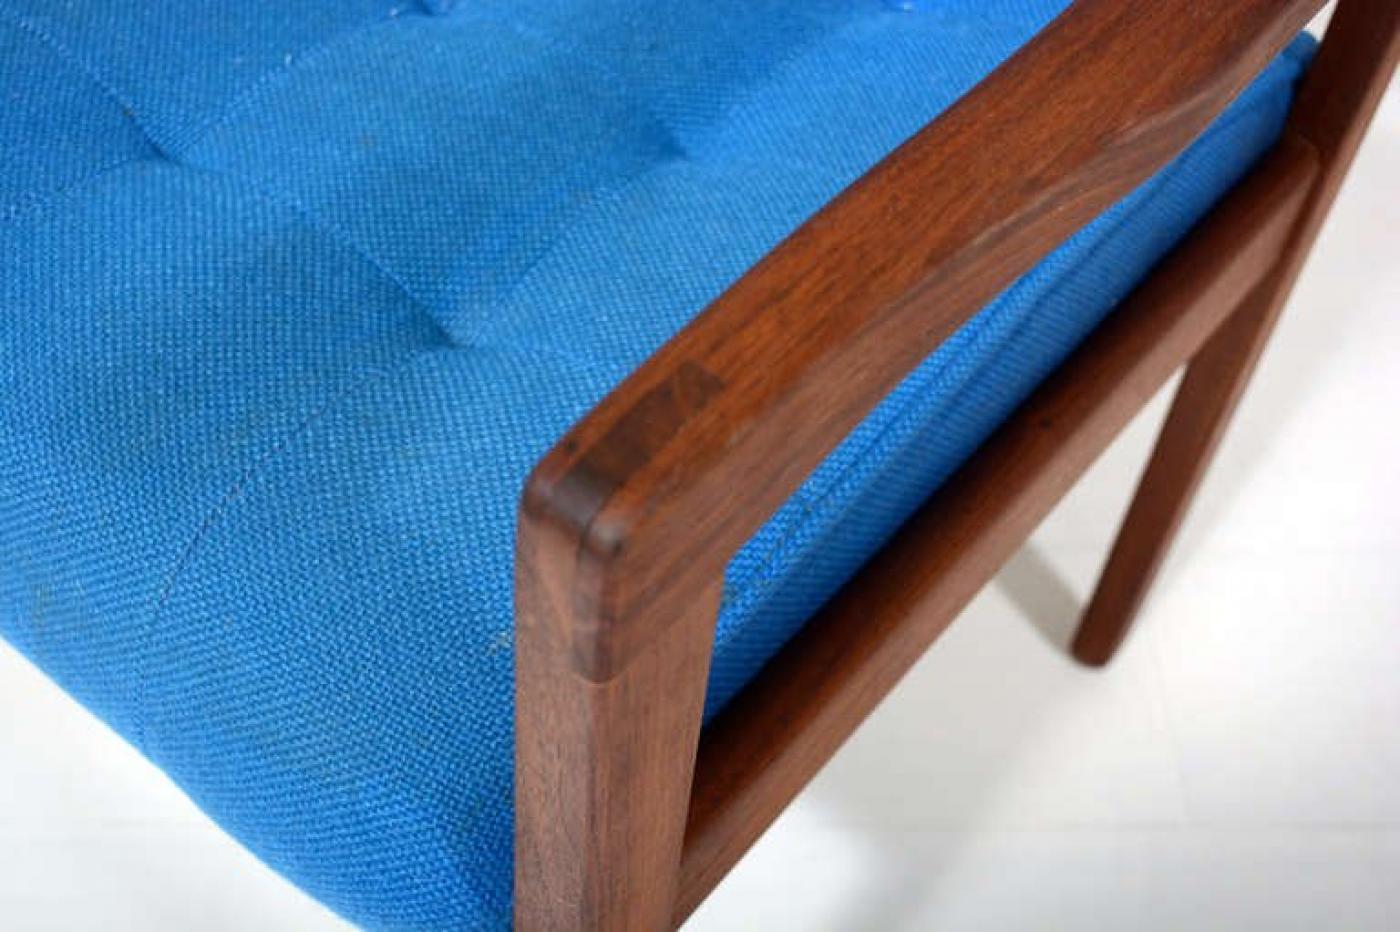 1950s Style Gerald McCabe Side Armchair Sculptural Walnut Wood Blue Tufted